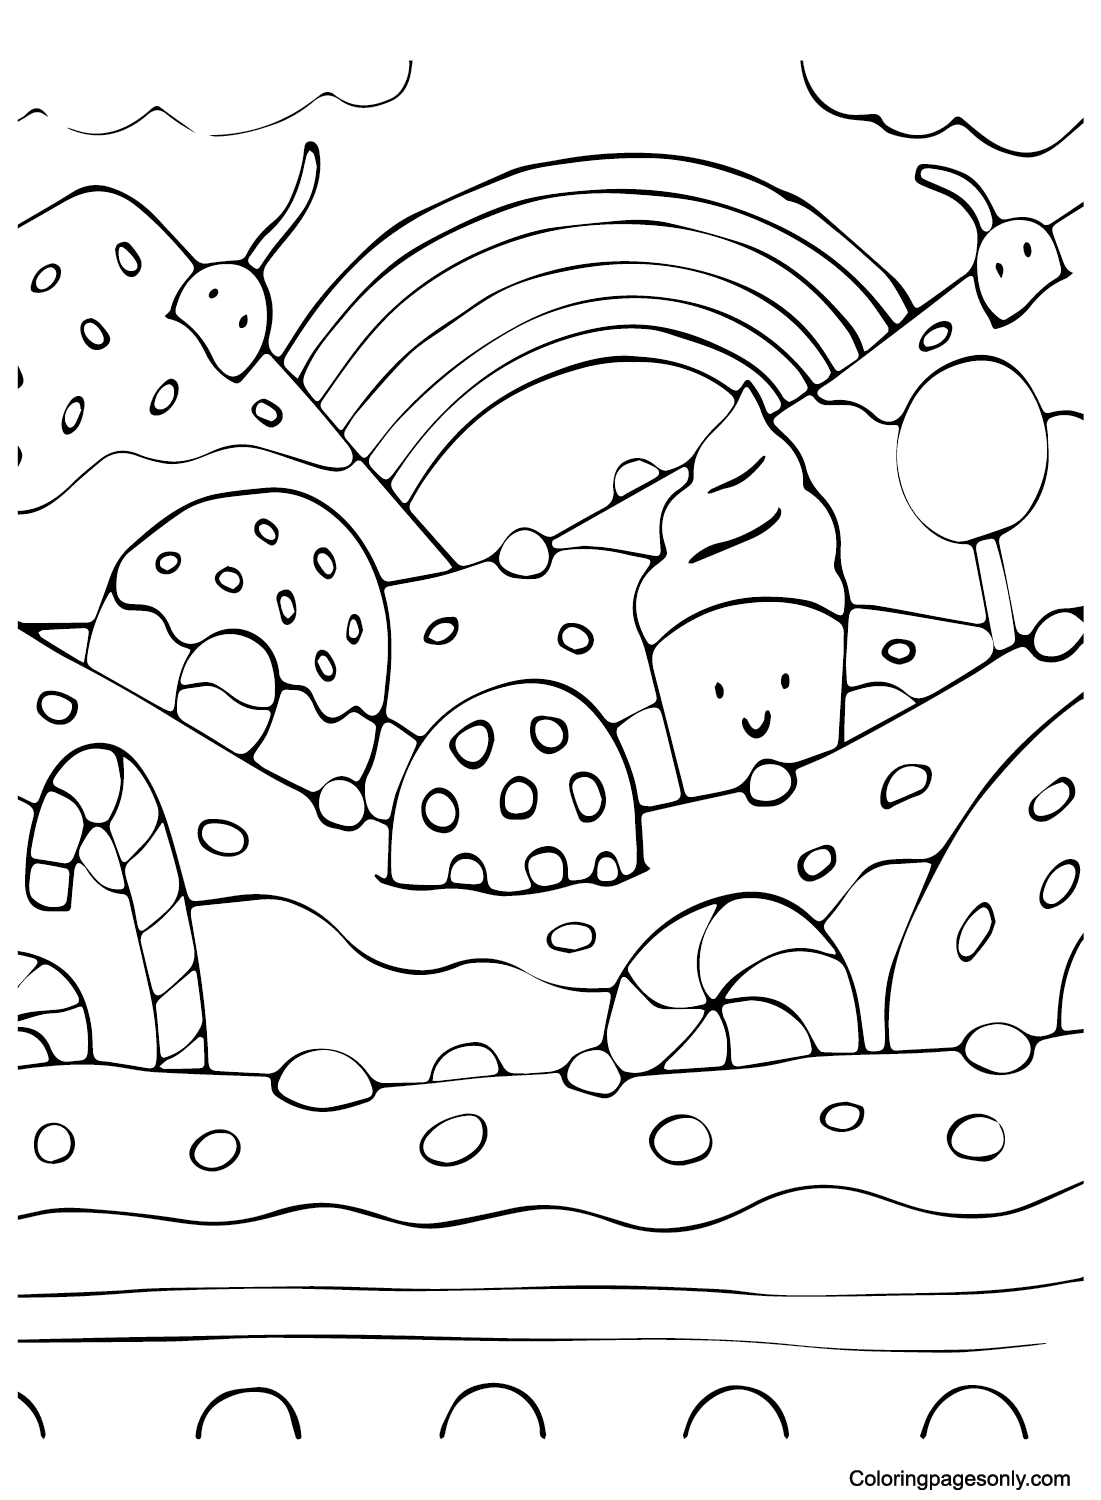 Print Candyland Coloring Page